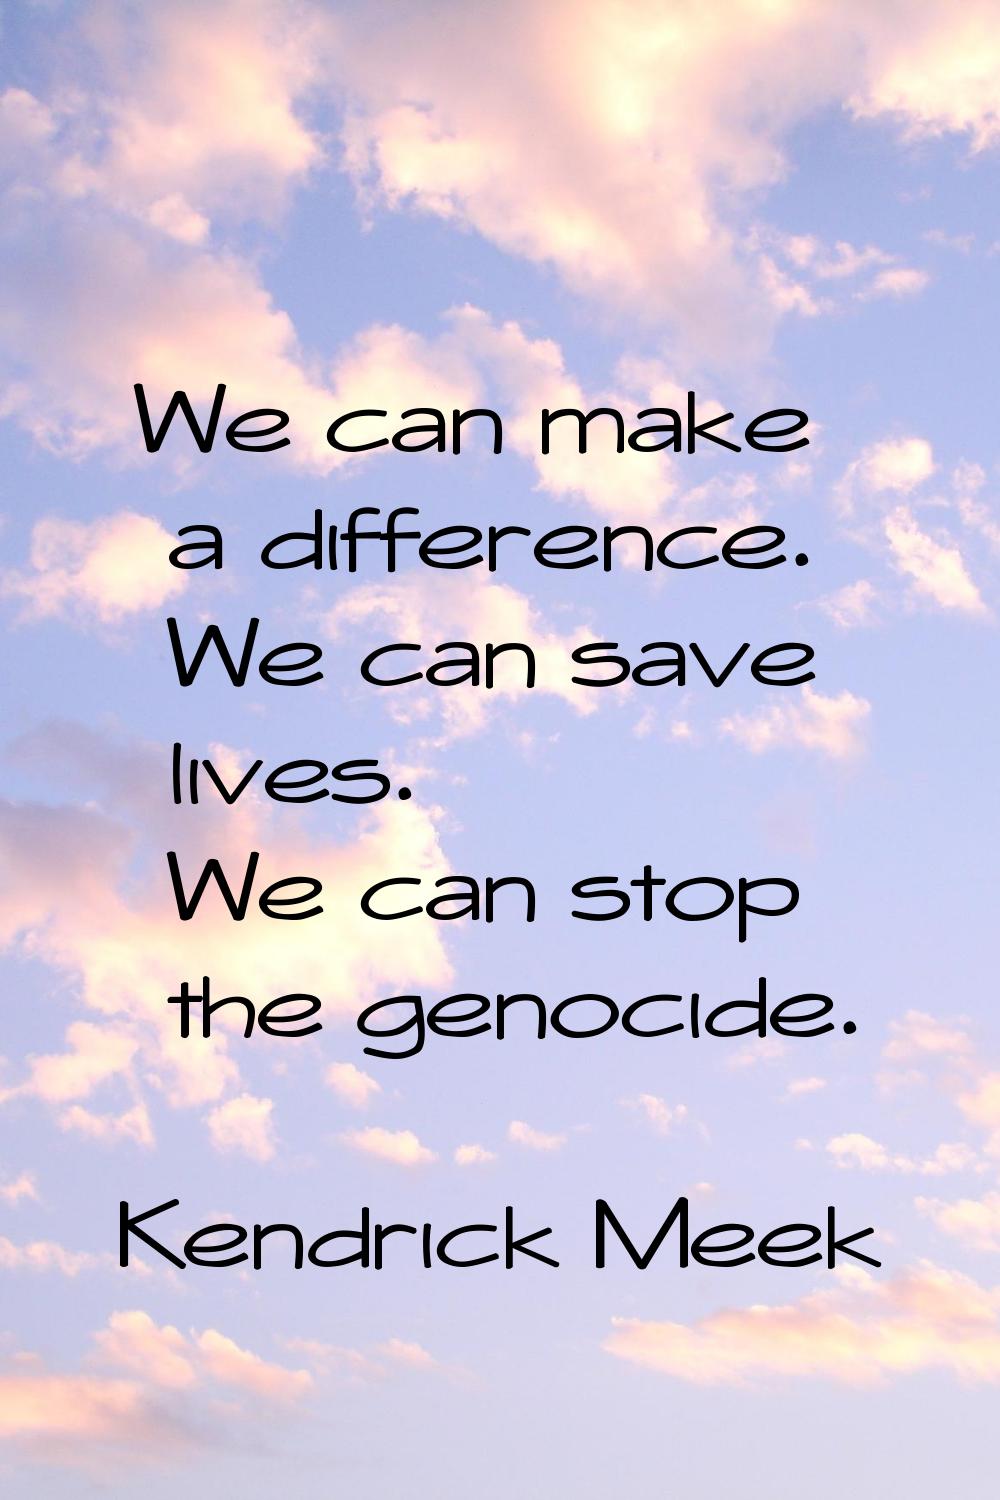 We can make a difference. We can save lives. We can stop the genocide.